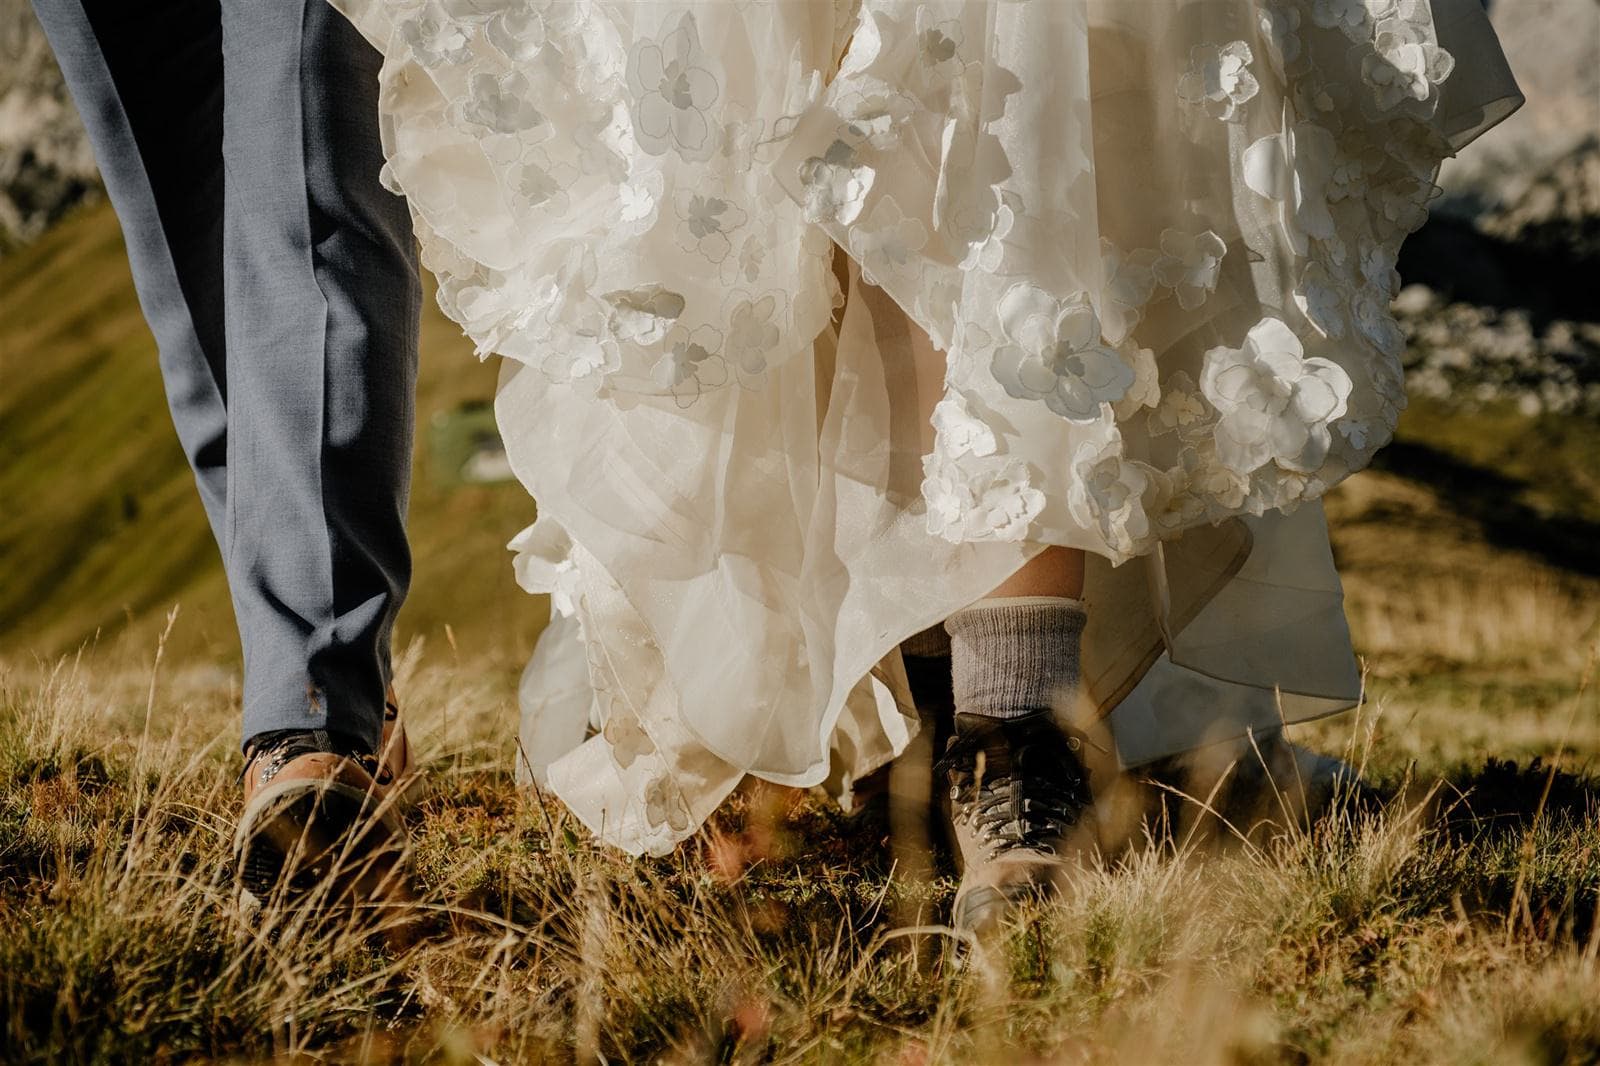 Close up of the feet of a bride and groom wearing hiking boots and walking through long grass.